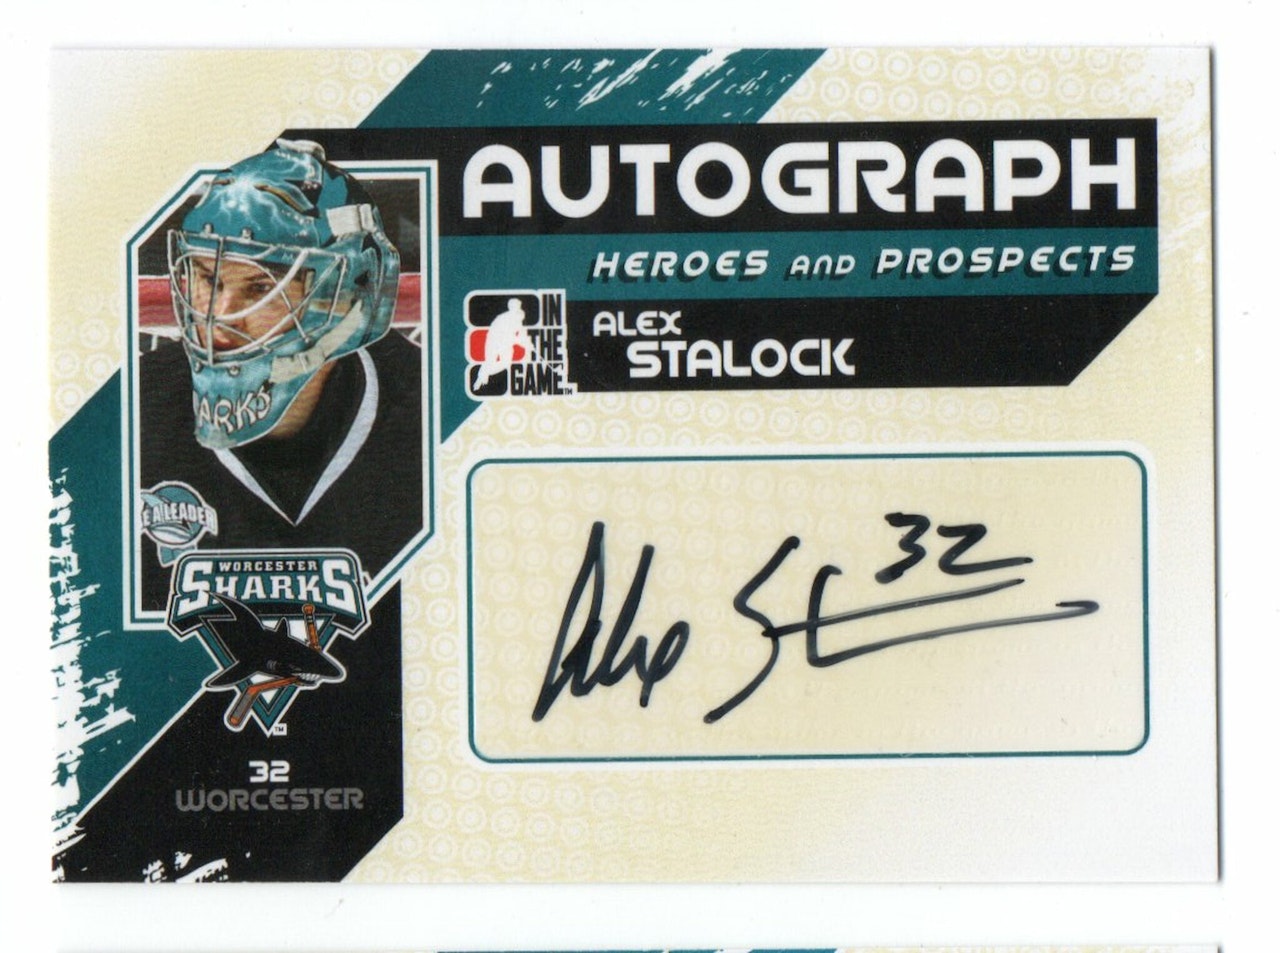 2010-11 ITG Heroes and Prospects Autographs #AAS Alex Stalock (40-193x7-SHARKS)